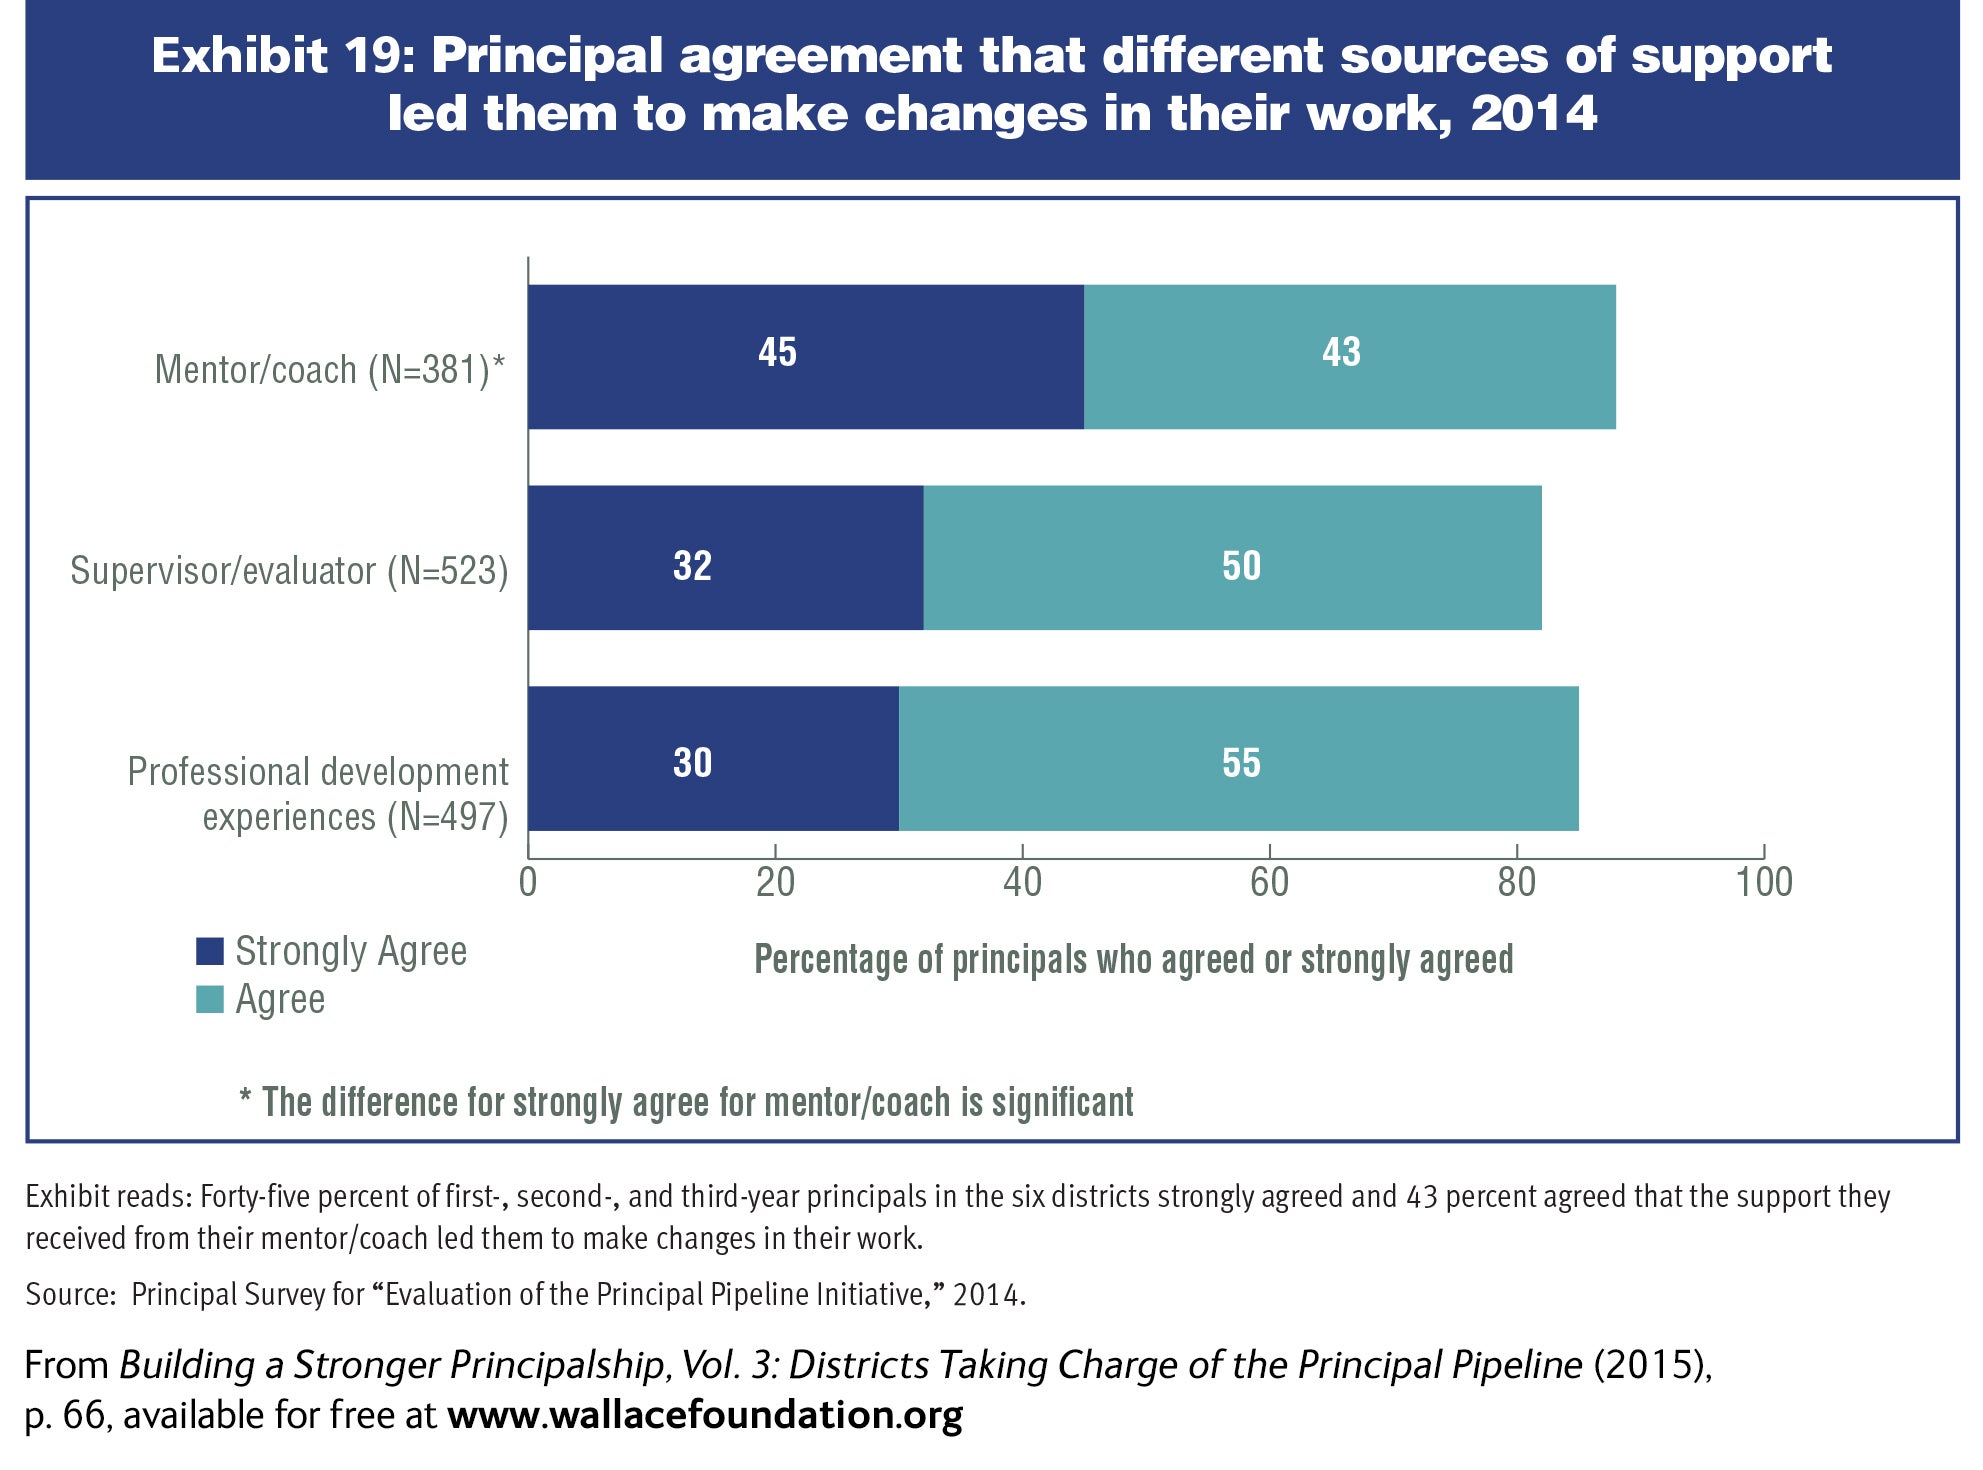 Chart showing the sources of support that led principals to make changes in their work 